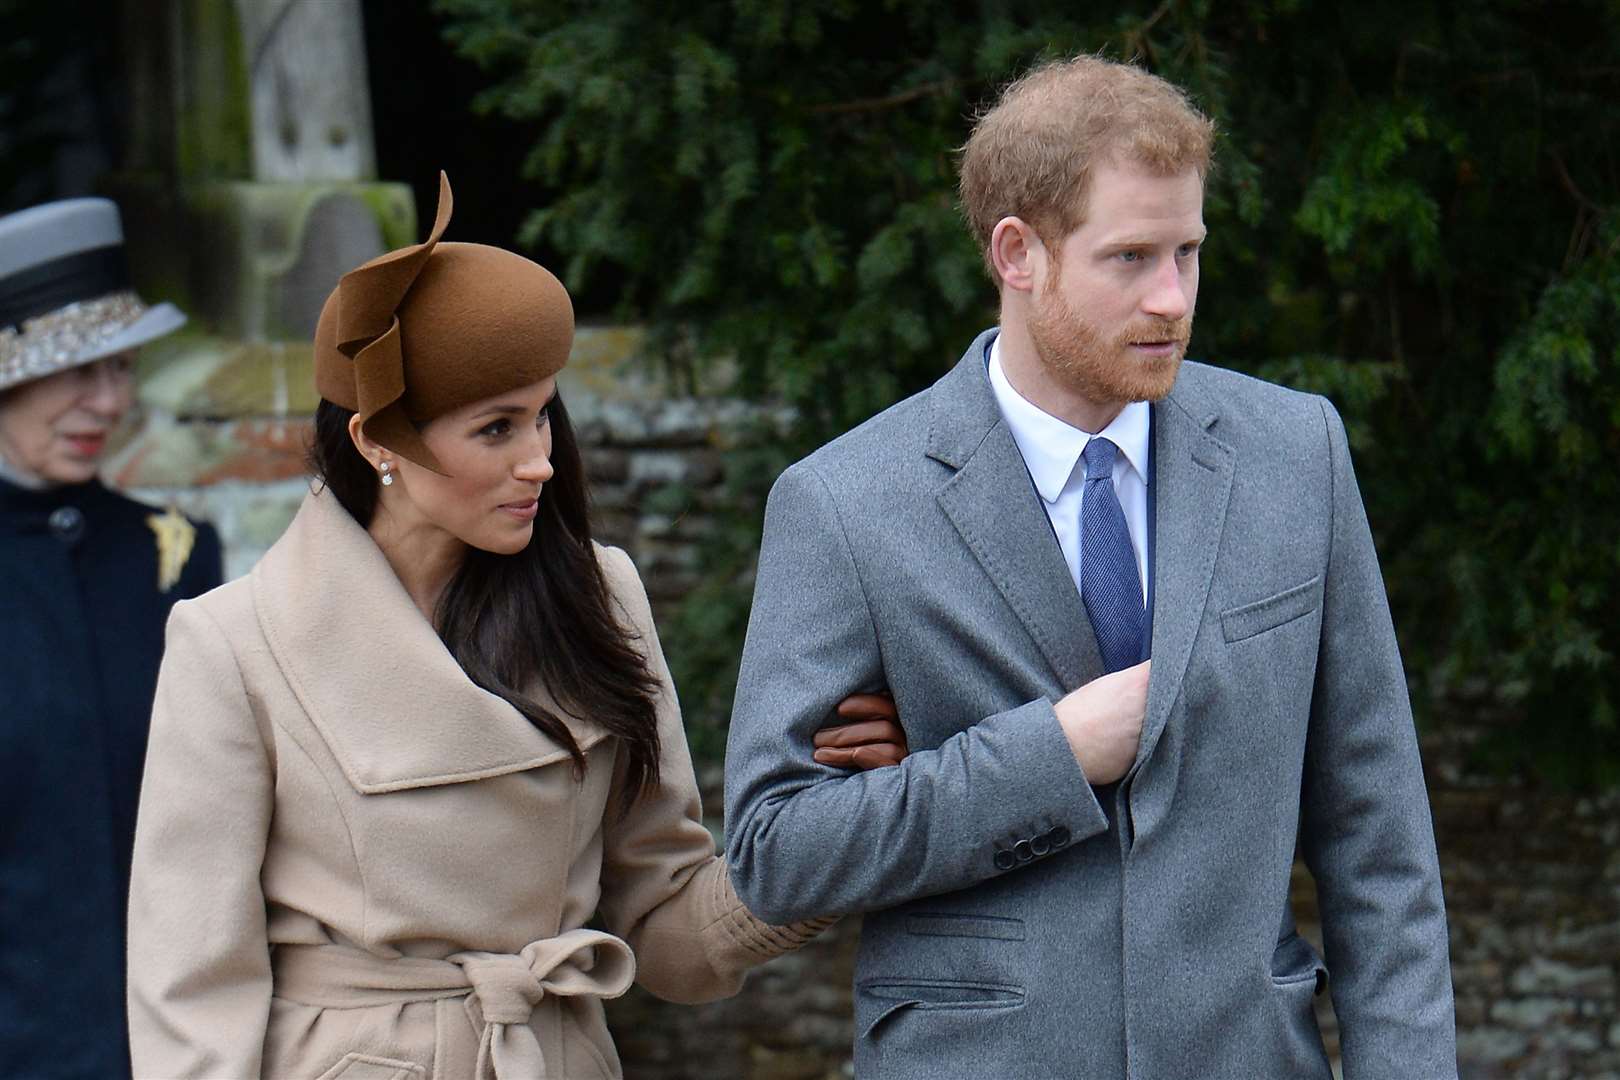 Meghan and Harry leave the Christmas Day morning service at St Mary Magdalene Church in Sandringham, Norfolk (Joe Giddens/PA)